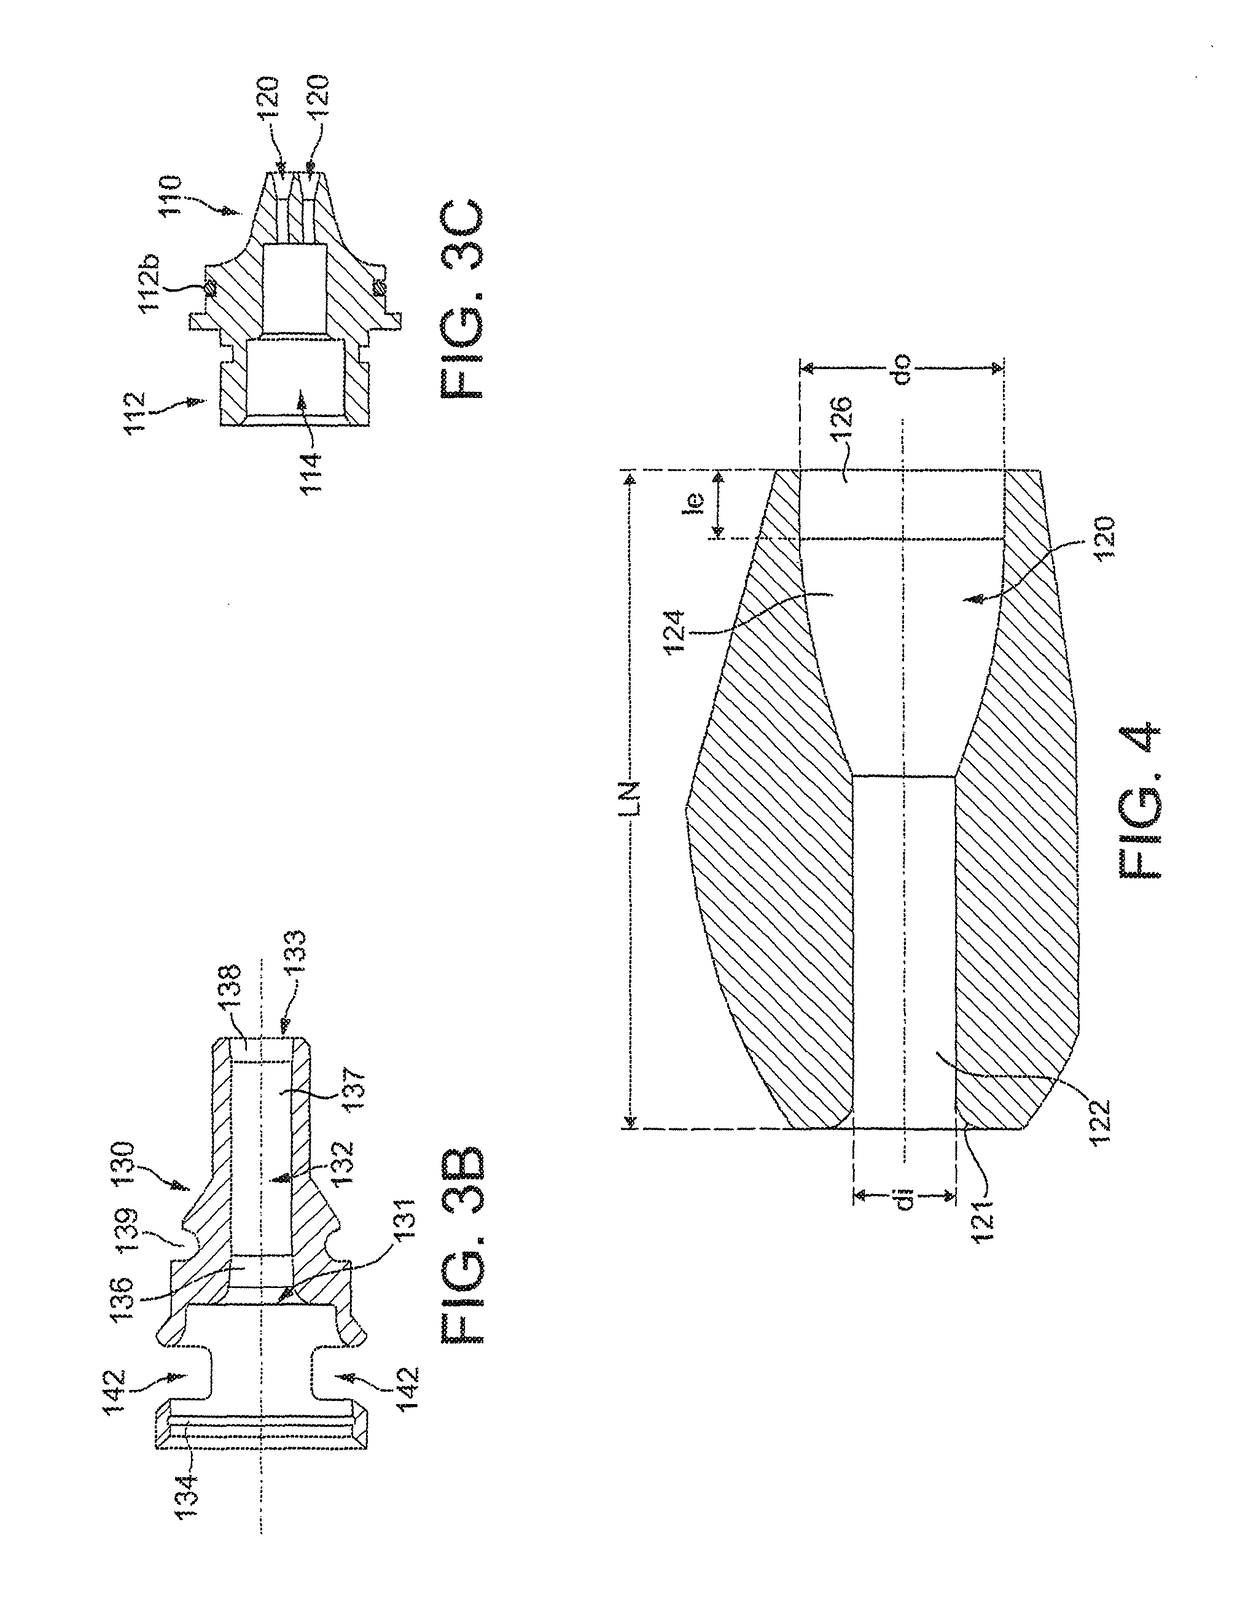 Vacuum ejector with multi-nozzle drive stage and booster